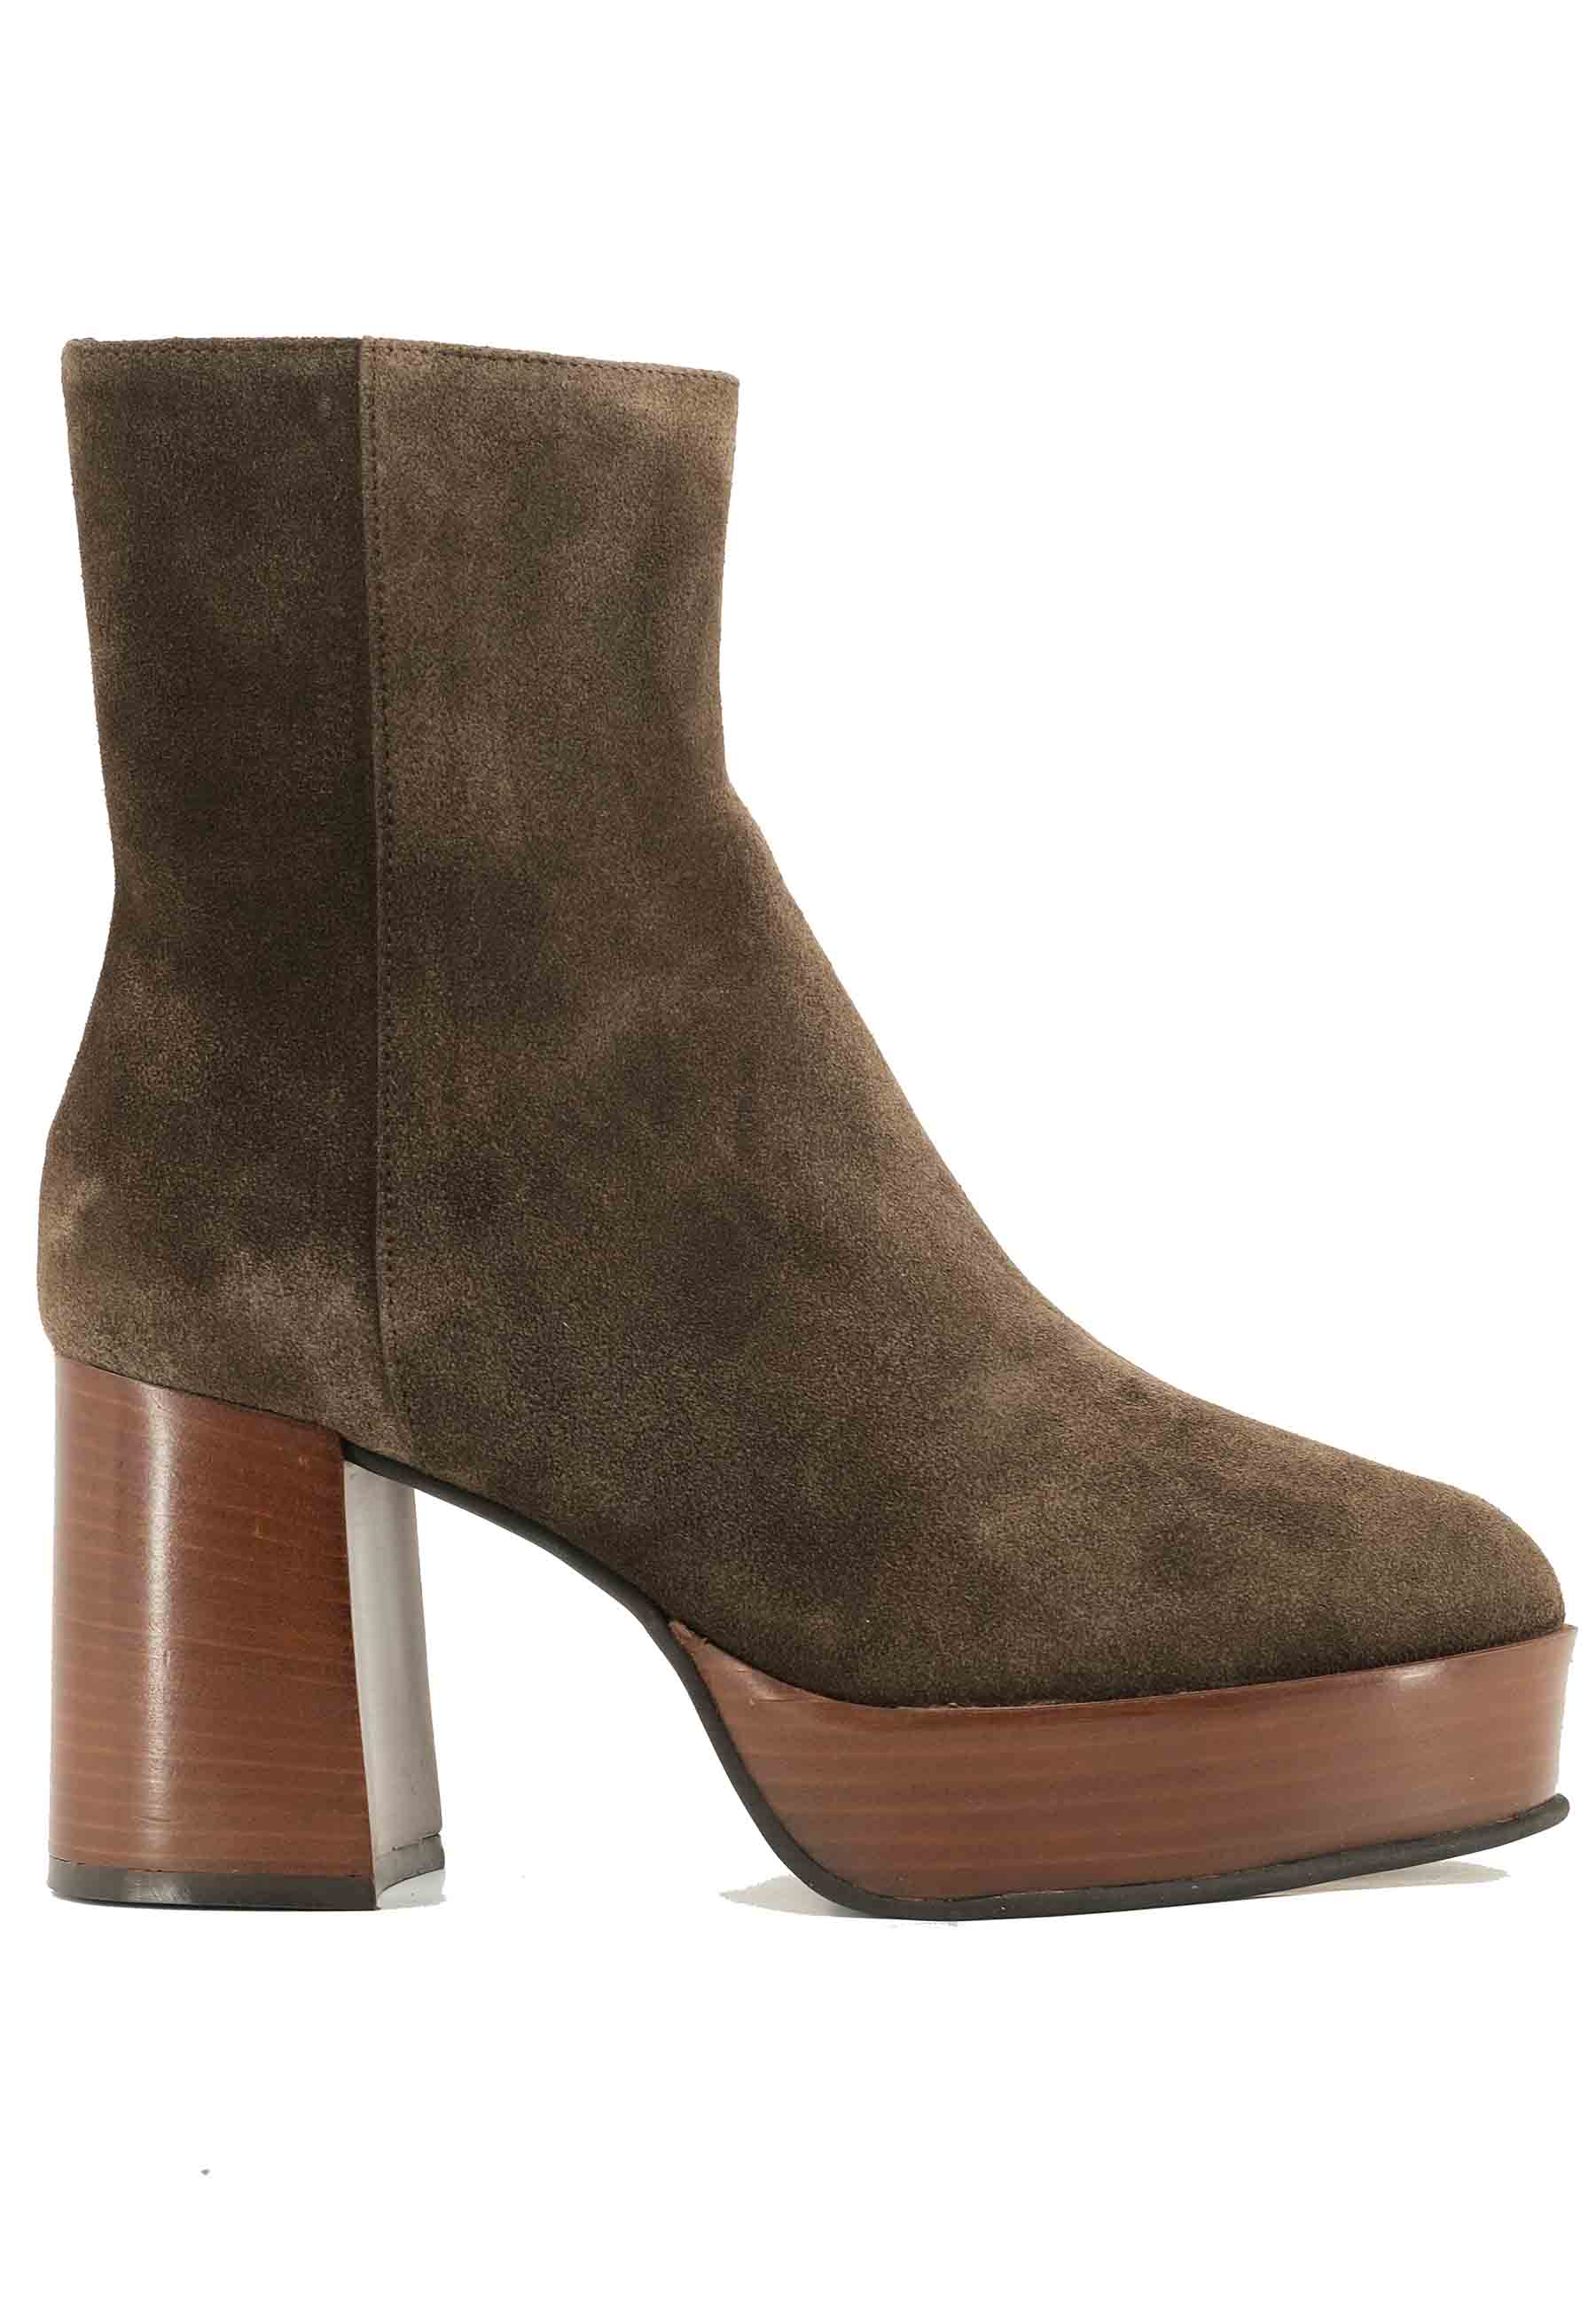 TR1556 ankle boots in brown suede with high heel and platform with side zip closure